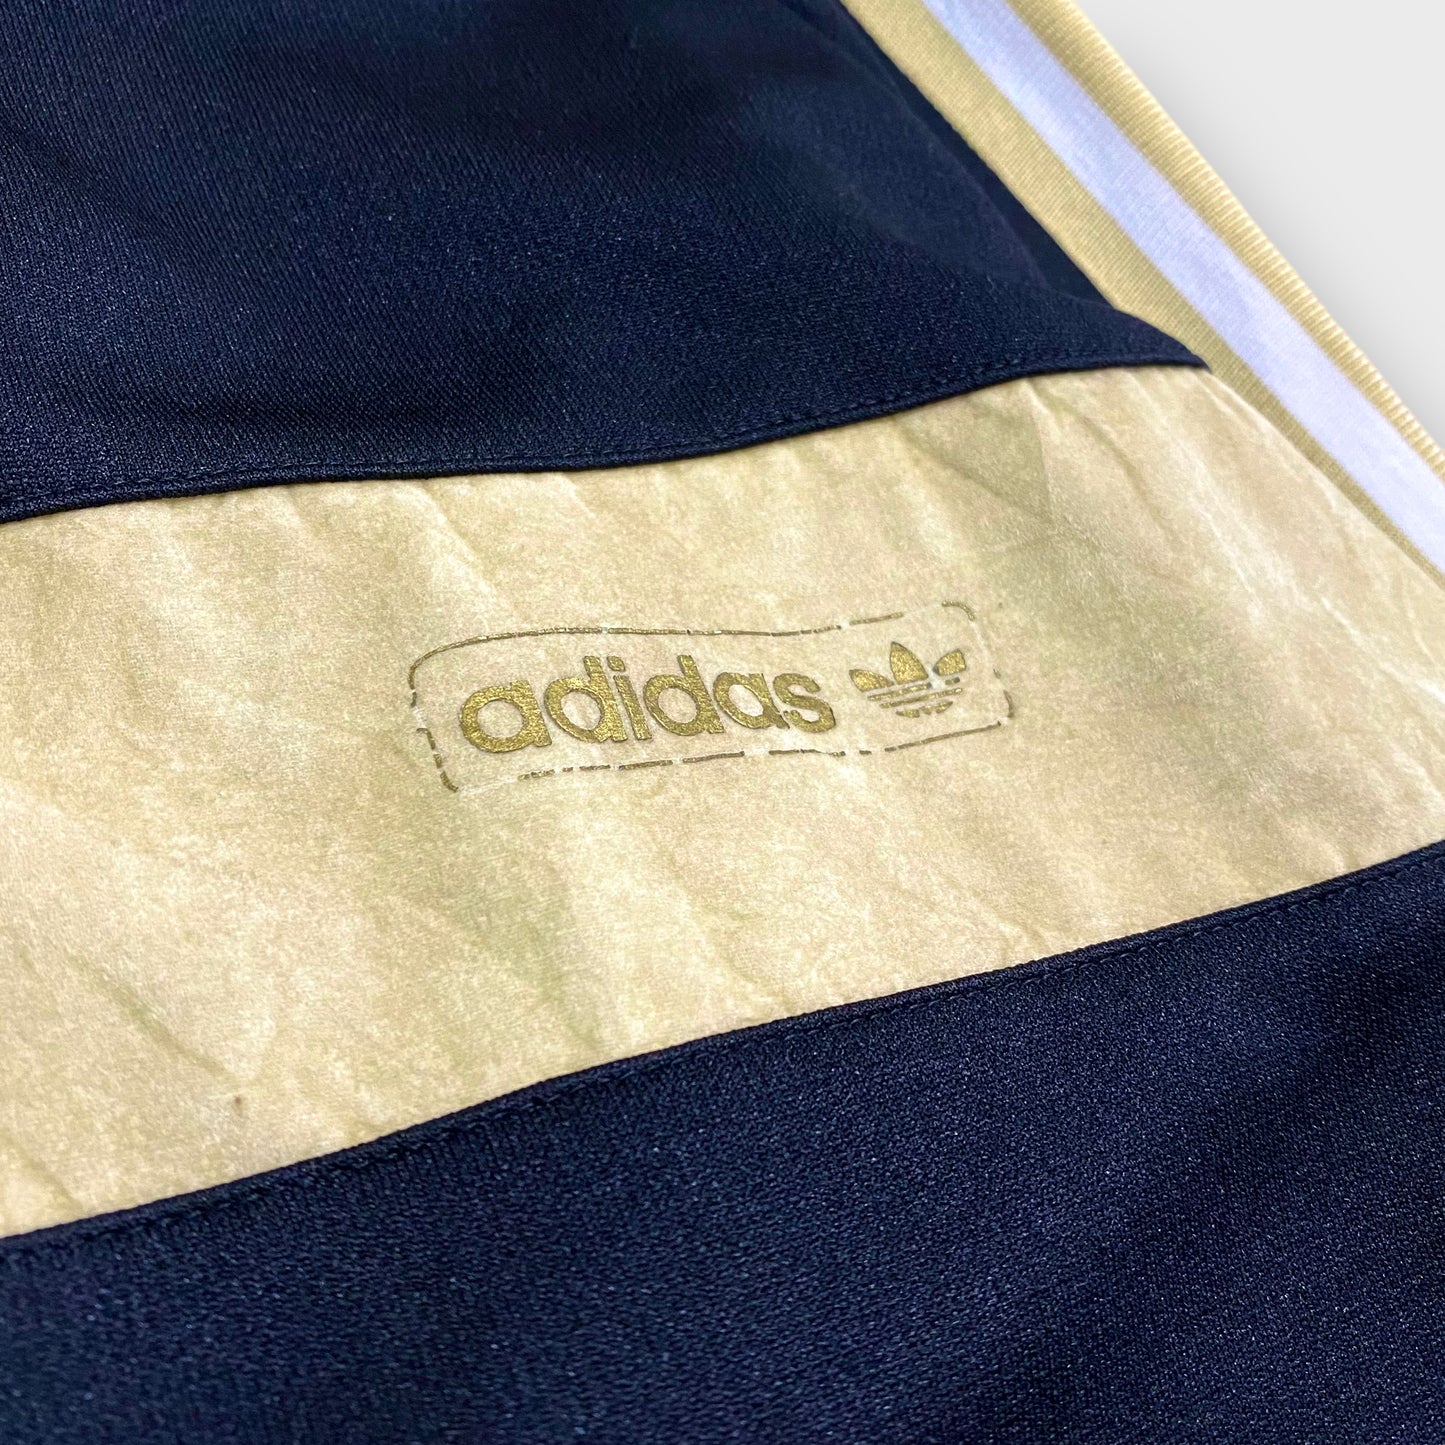 90’s "adidas" Fabric switched track jacket